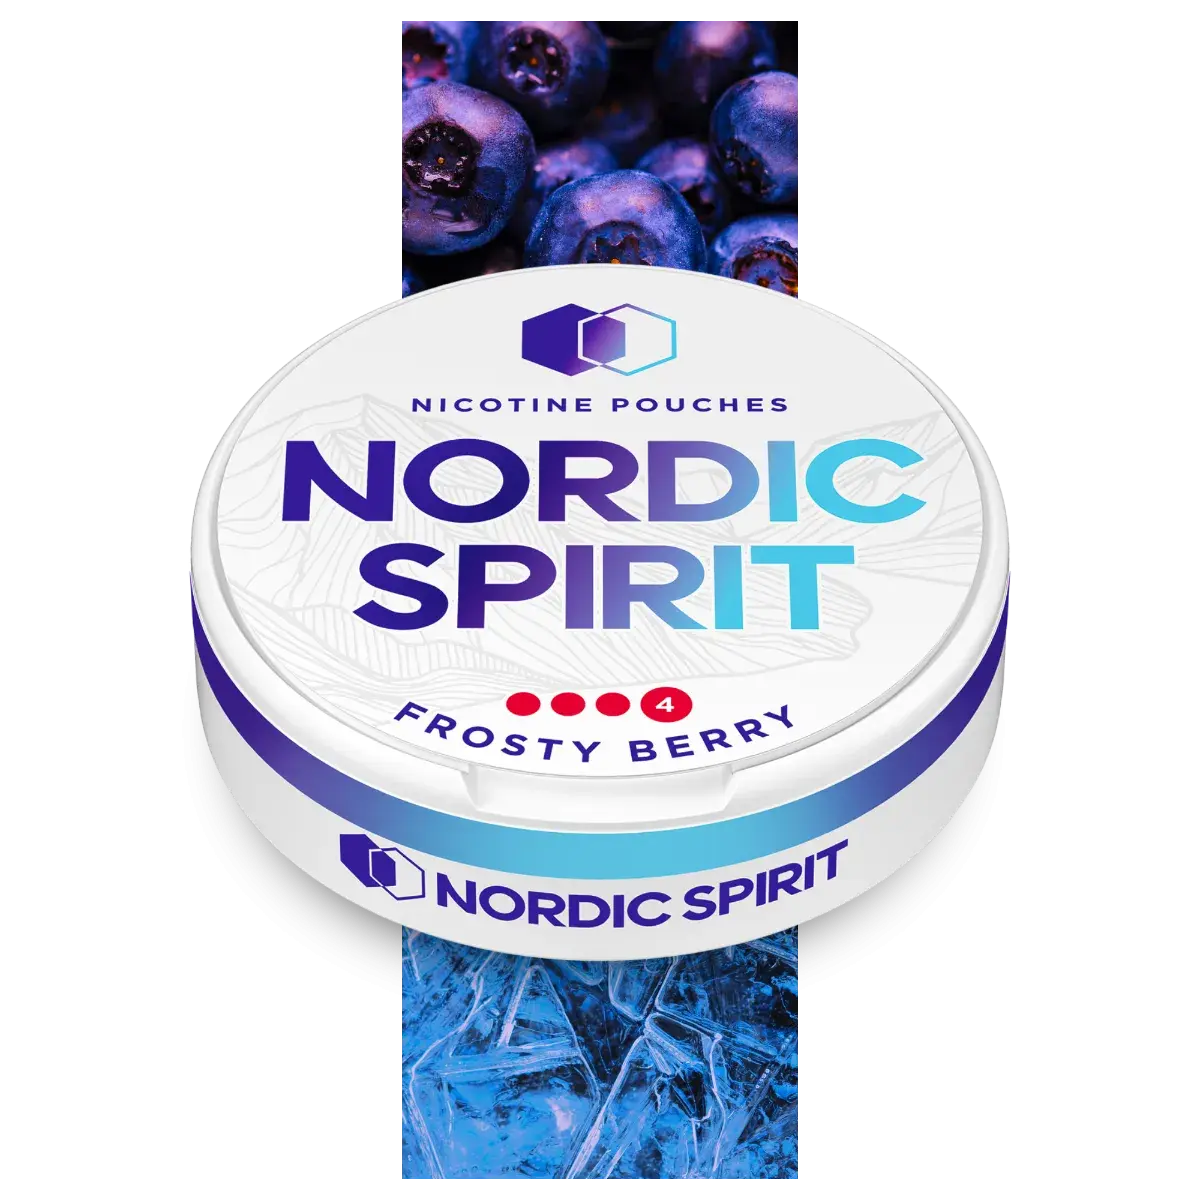 Can of Nordic Spirit Frosty Berry Nicotine pouches in a X-strong strength.